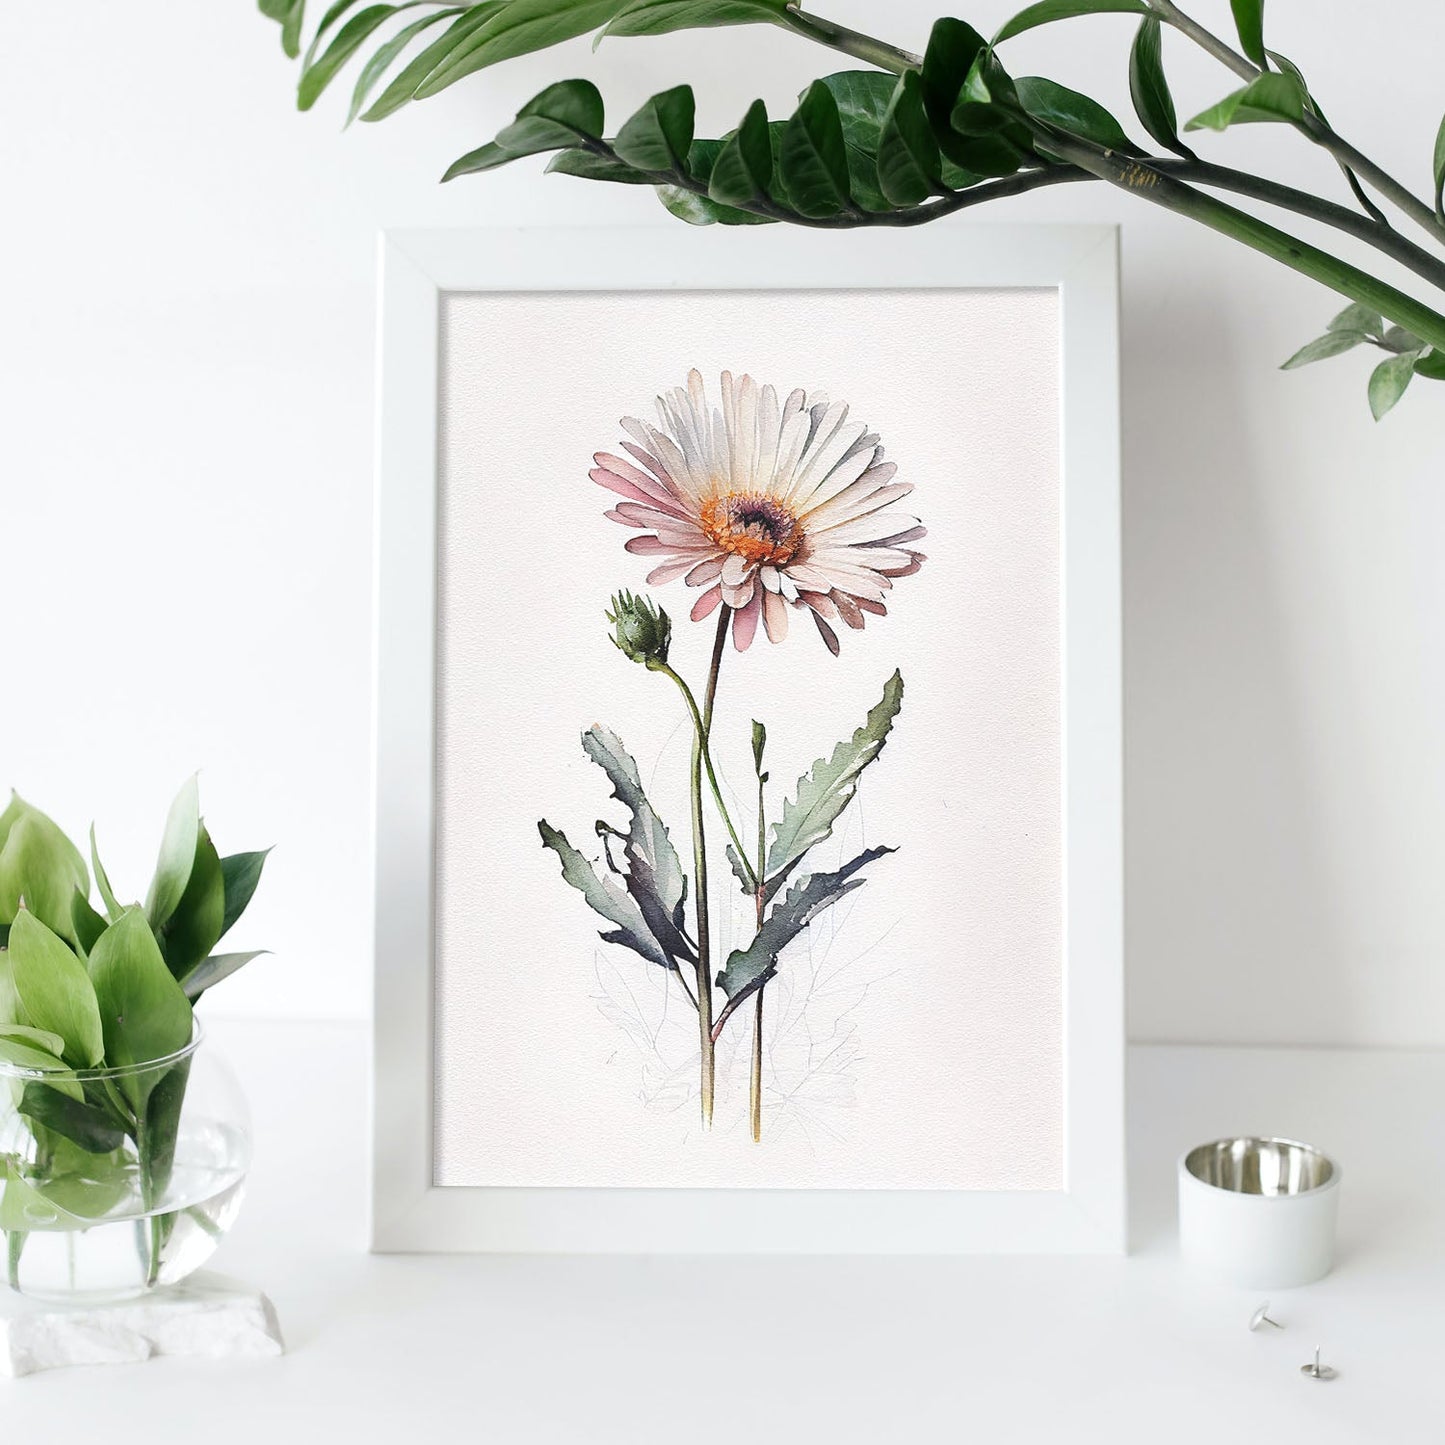 Nacnic watercolor minmal Daisy. Aesthetic Wall Art Prints for Bedroom or Living Room Design.